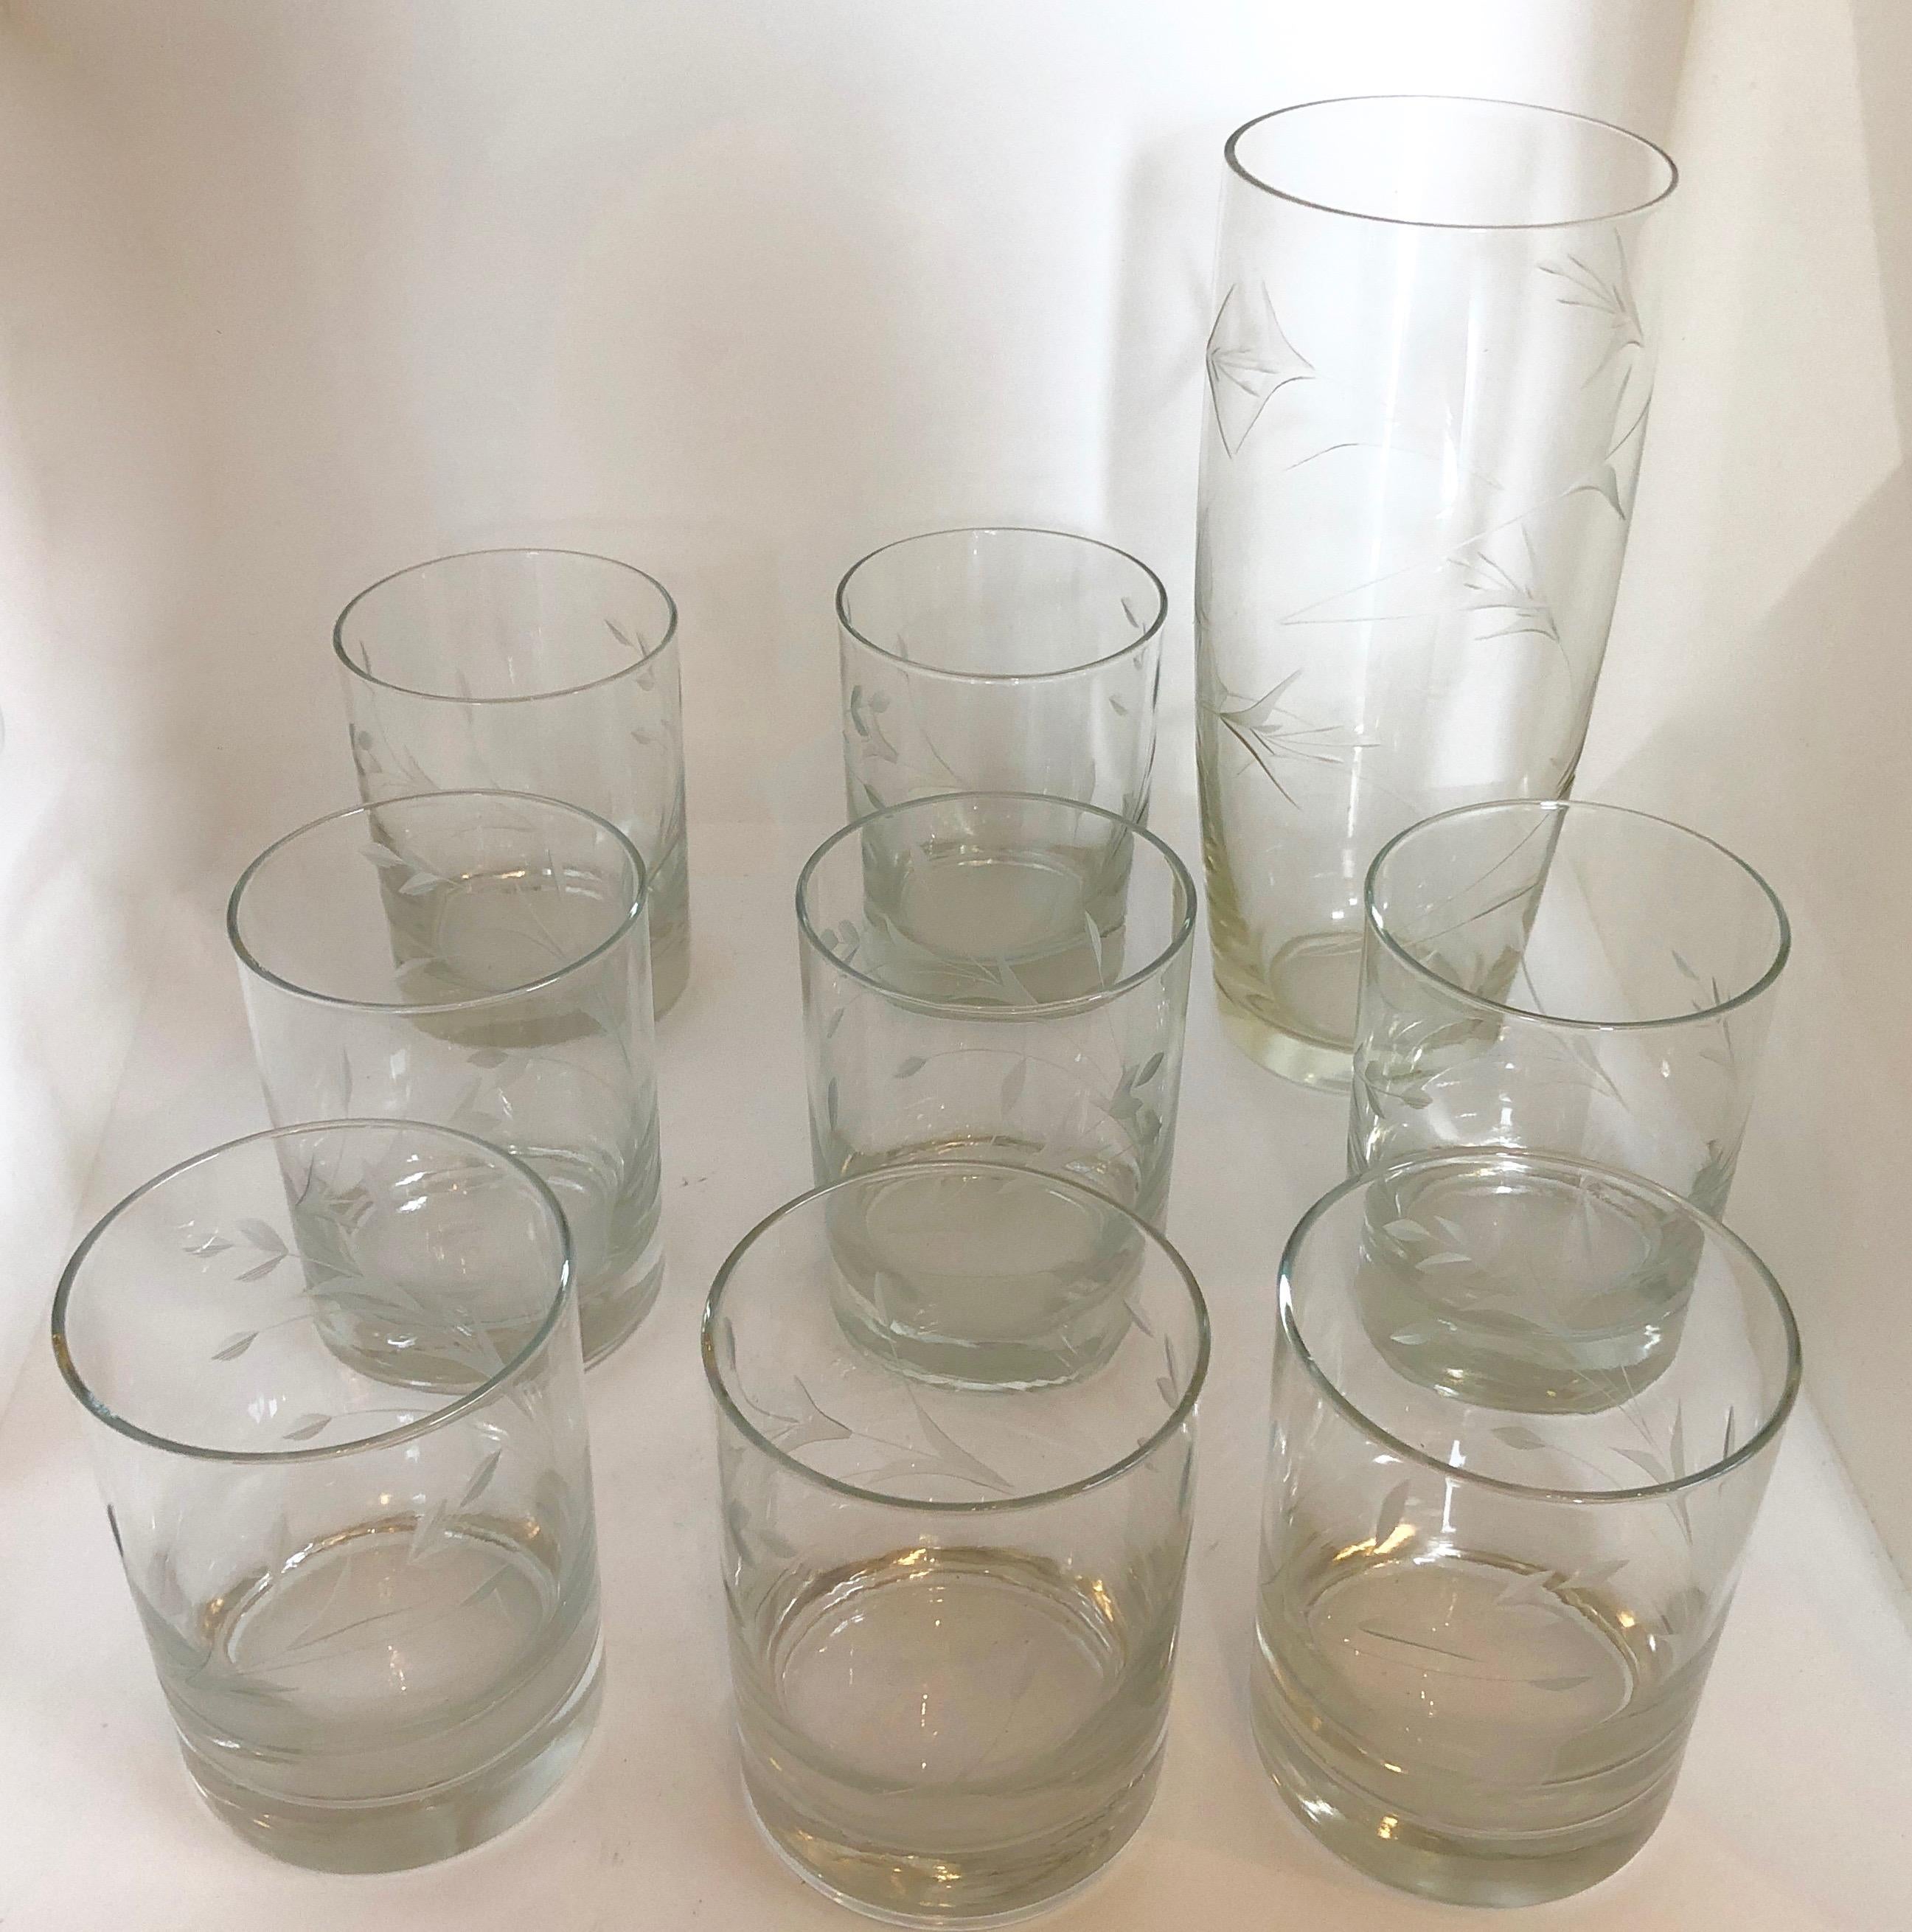 Offered is a Mid-Century Modern glamorous West Virginia glass specialty Co engraved botanical themed set of cocktail glasses / barware comprising of eight double old fashioned cocktail glasses (4 1/4